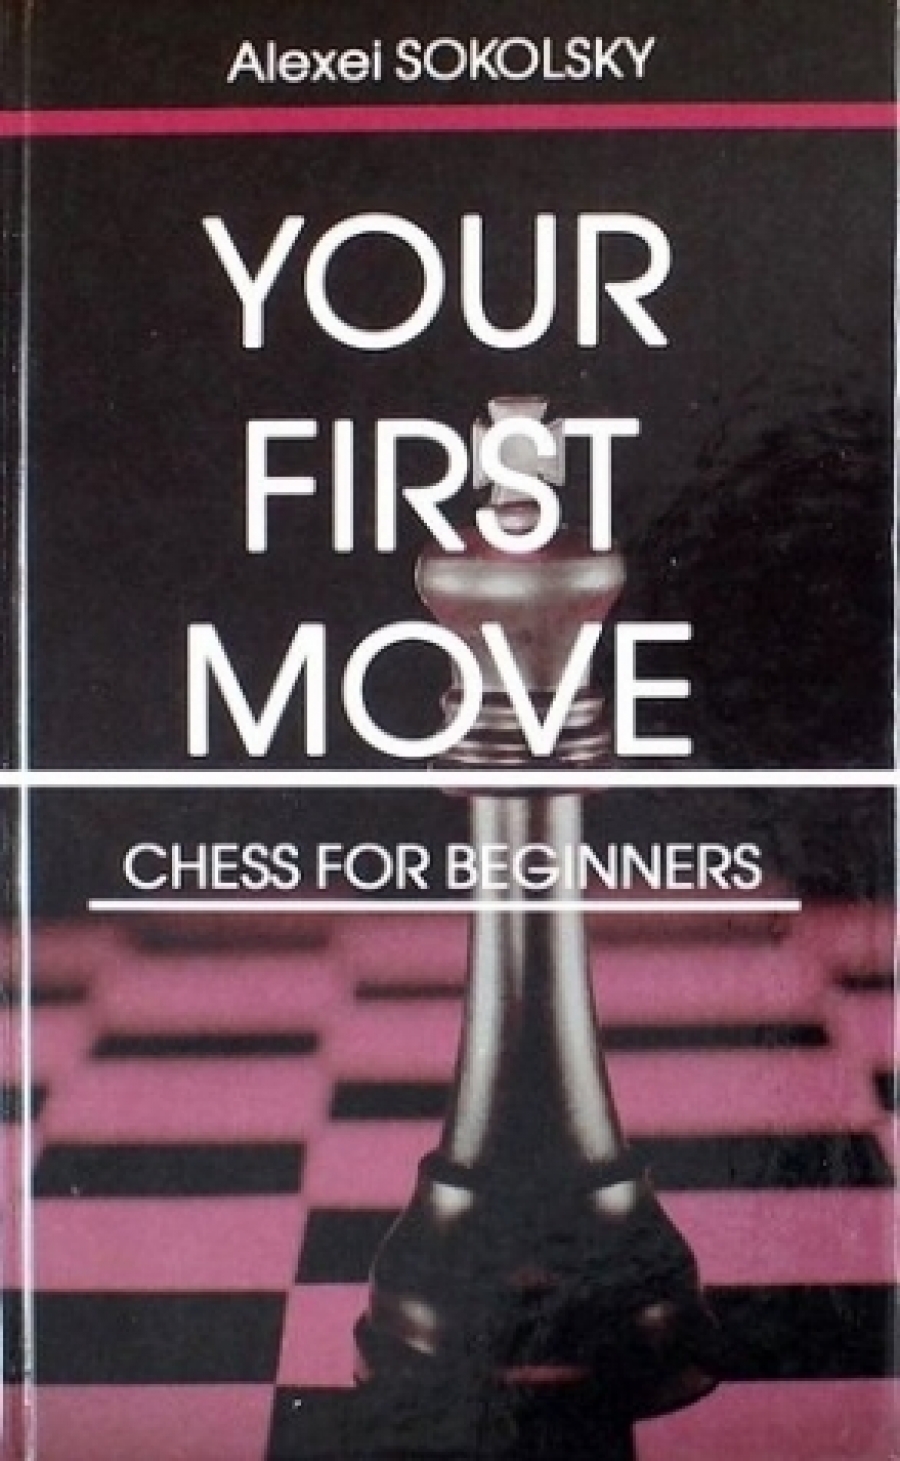  . Your first move. Chess for beginners 